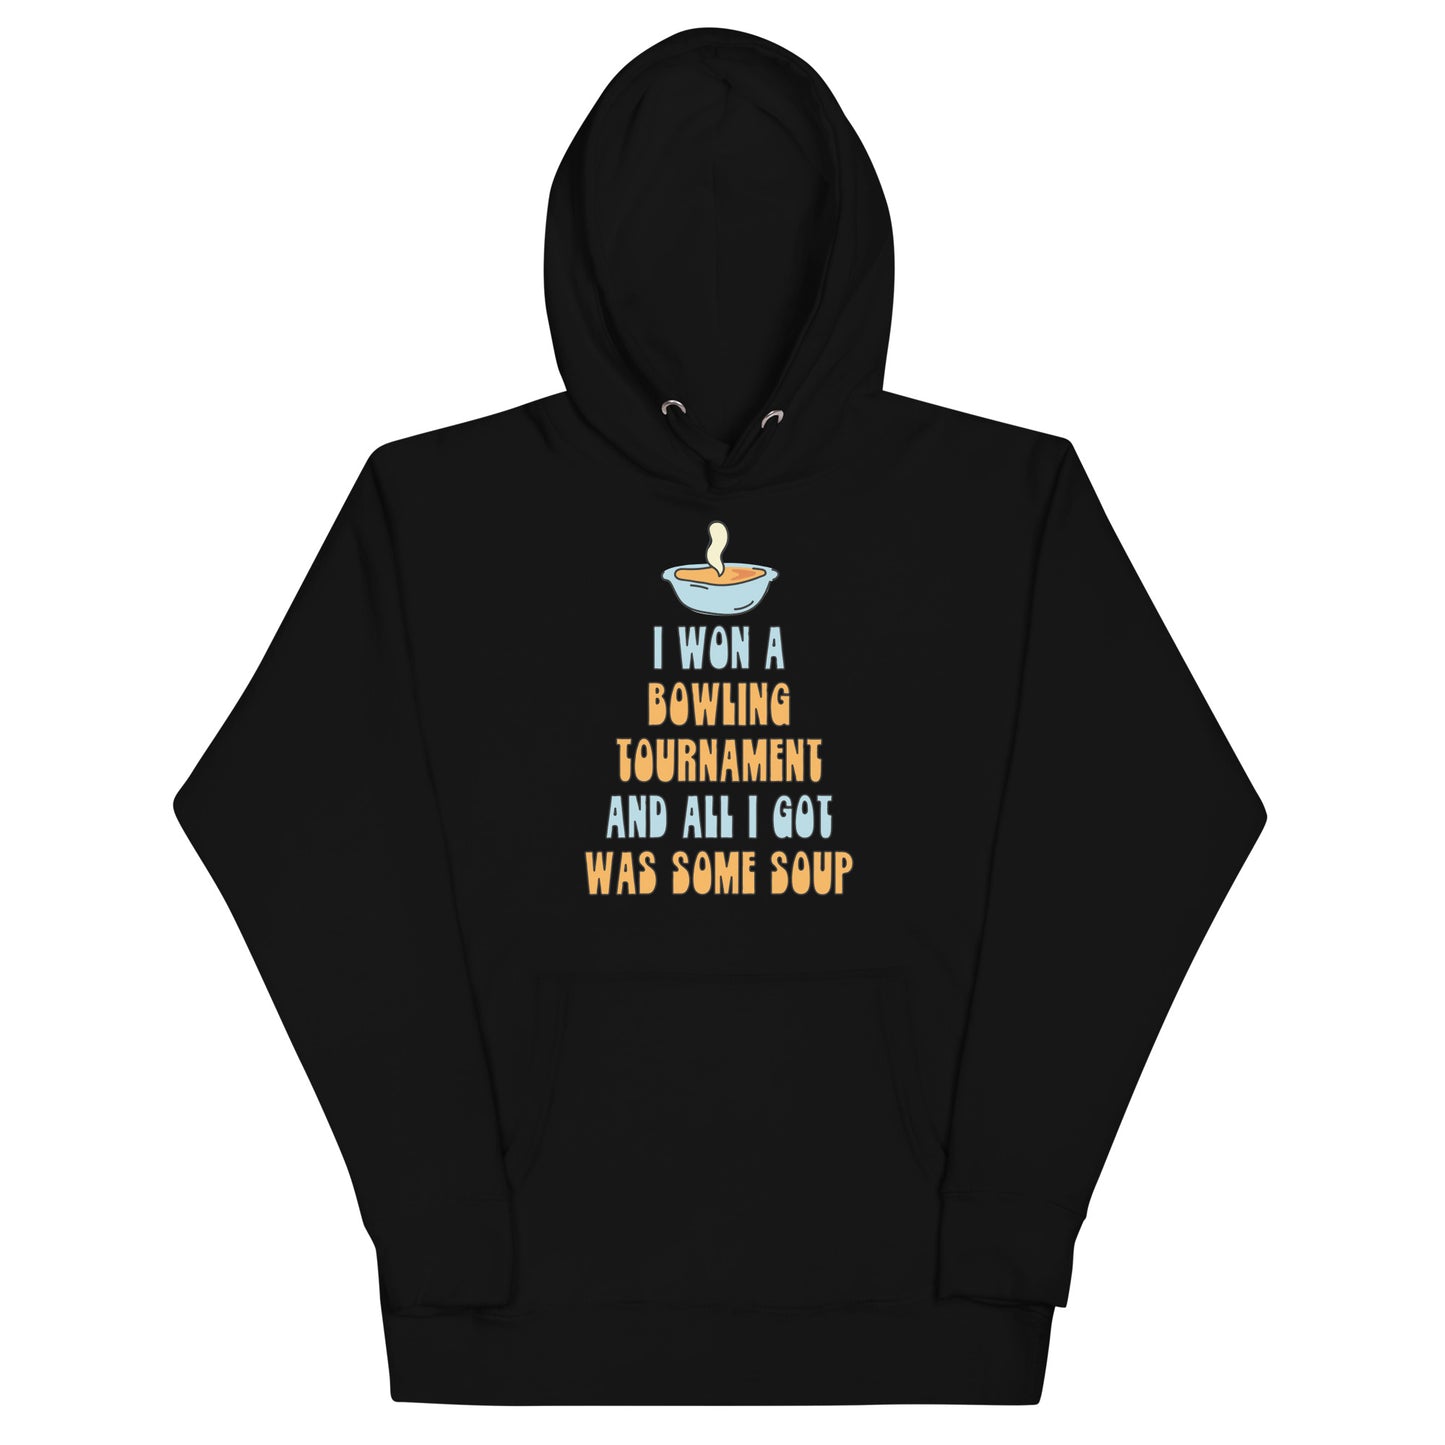 I Won a Bowling Tournament (Bowling for Soup) Unisex Hoodie